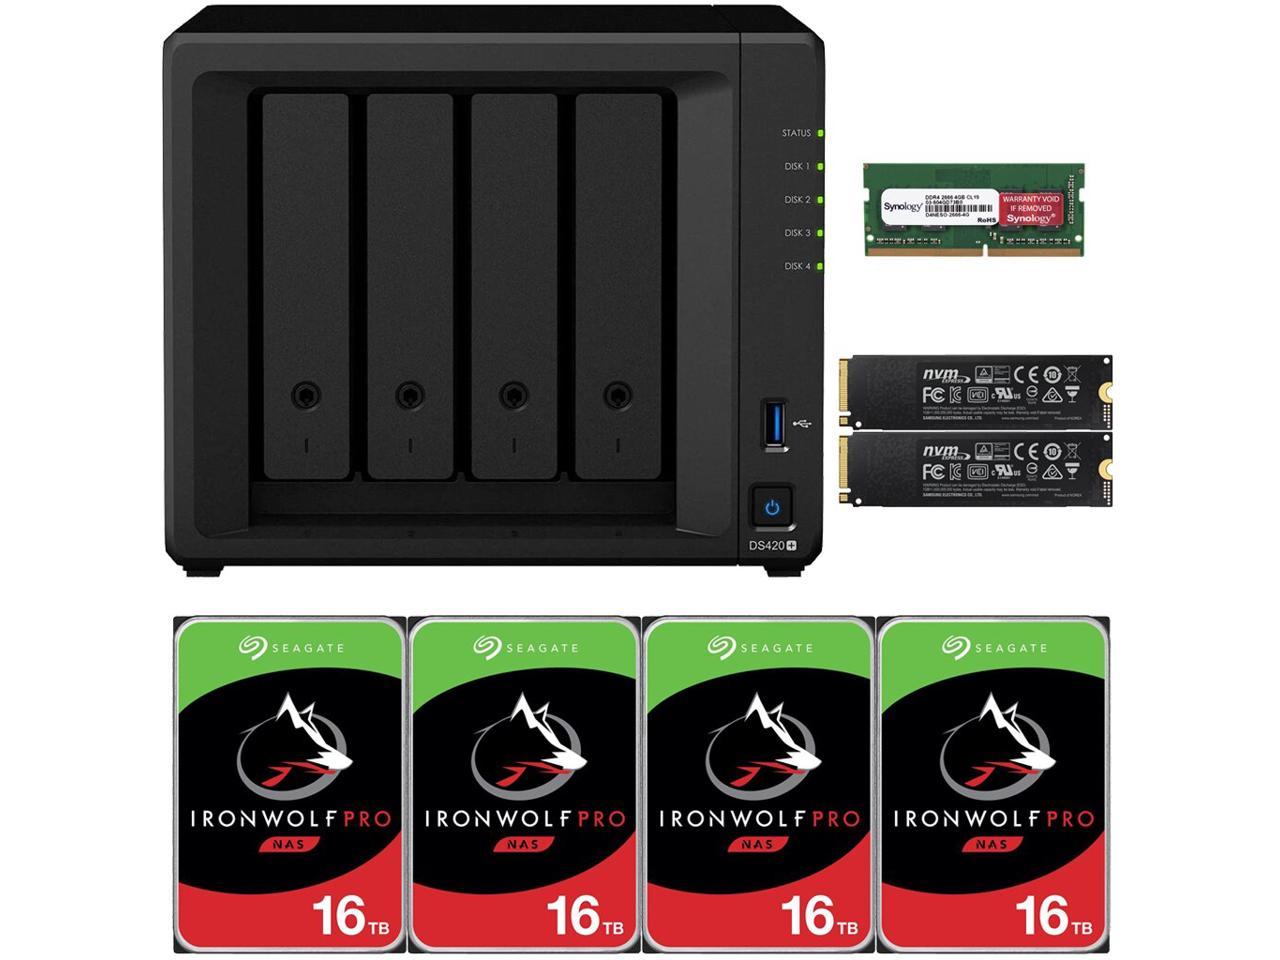 4 x 14TB of PRO NAS Drives and 500GB NVME Cache Fully Assembled and Tested by CustomTechSales 2 x 250GB DS920+ 4-Bay DiskStation Bundle with 8GB RAM and 56TB